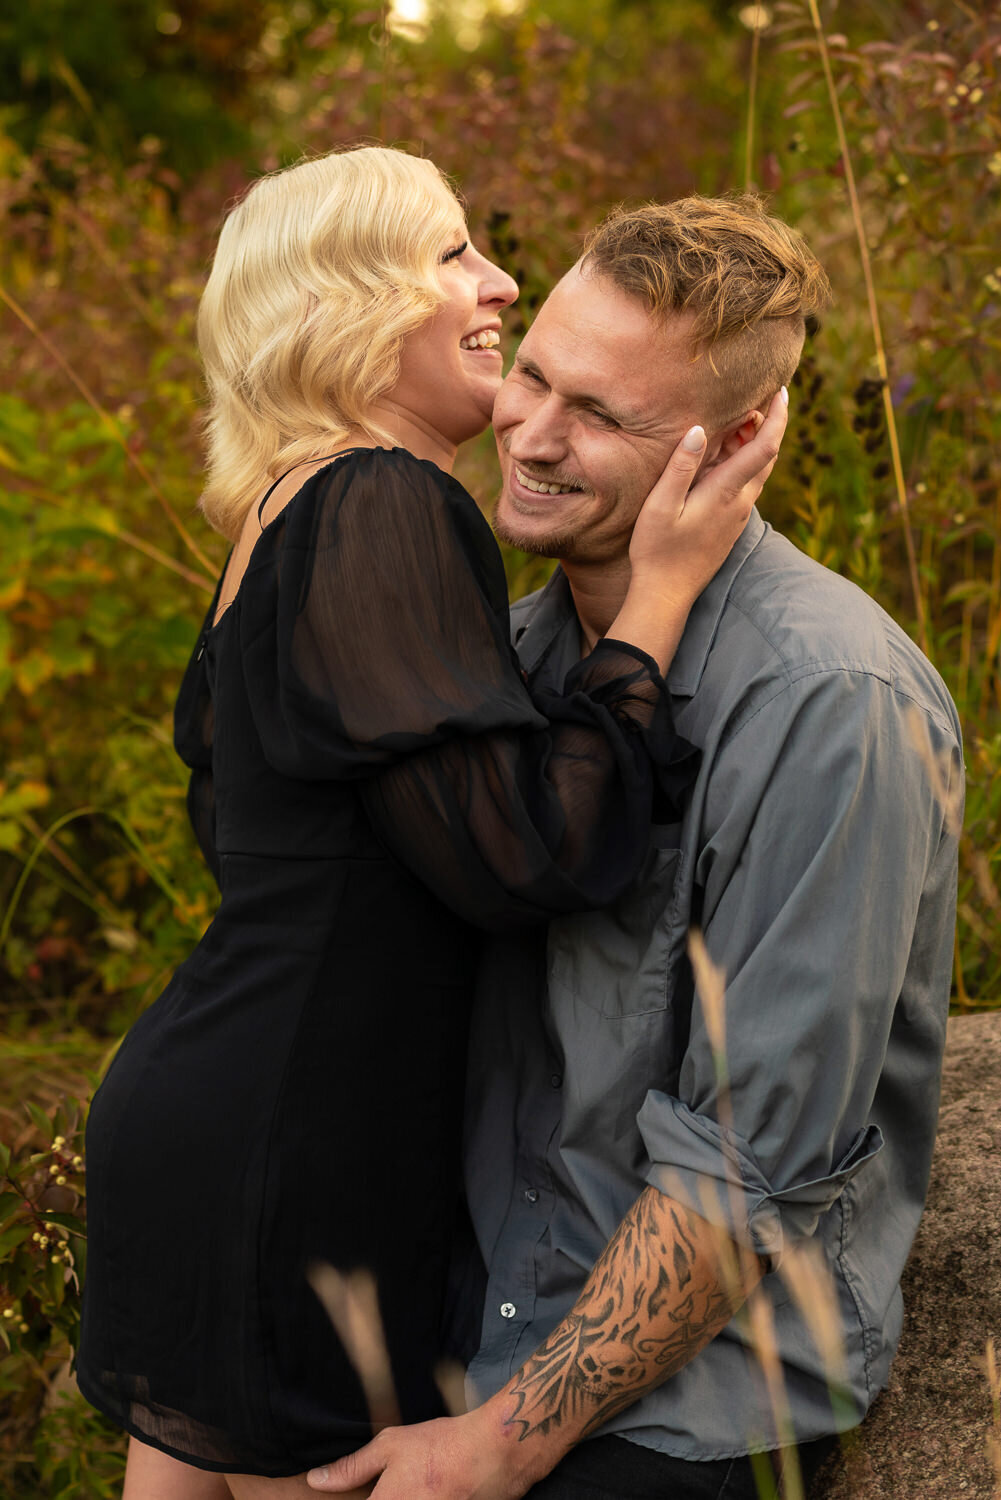 Man and woman in black dress laugh during sunset engagement photography.